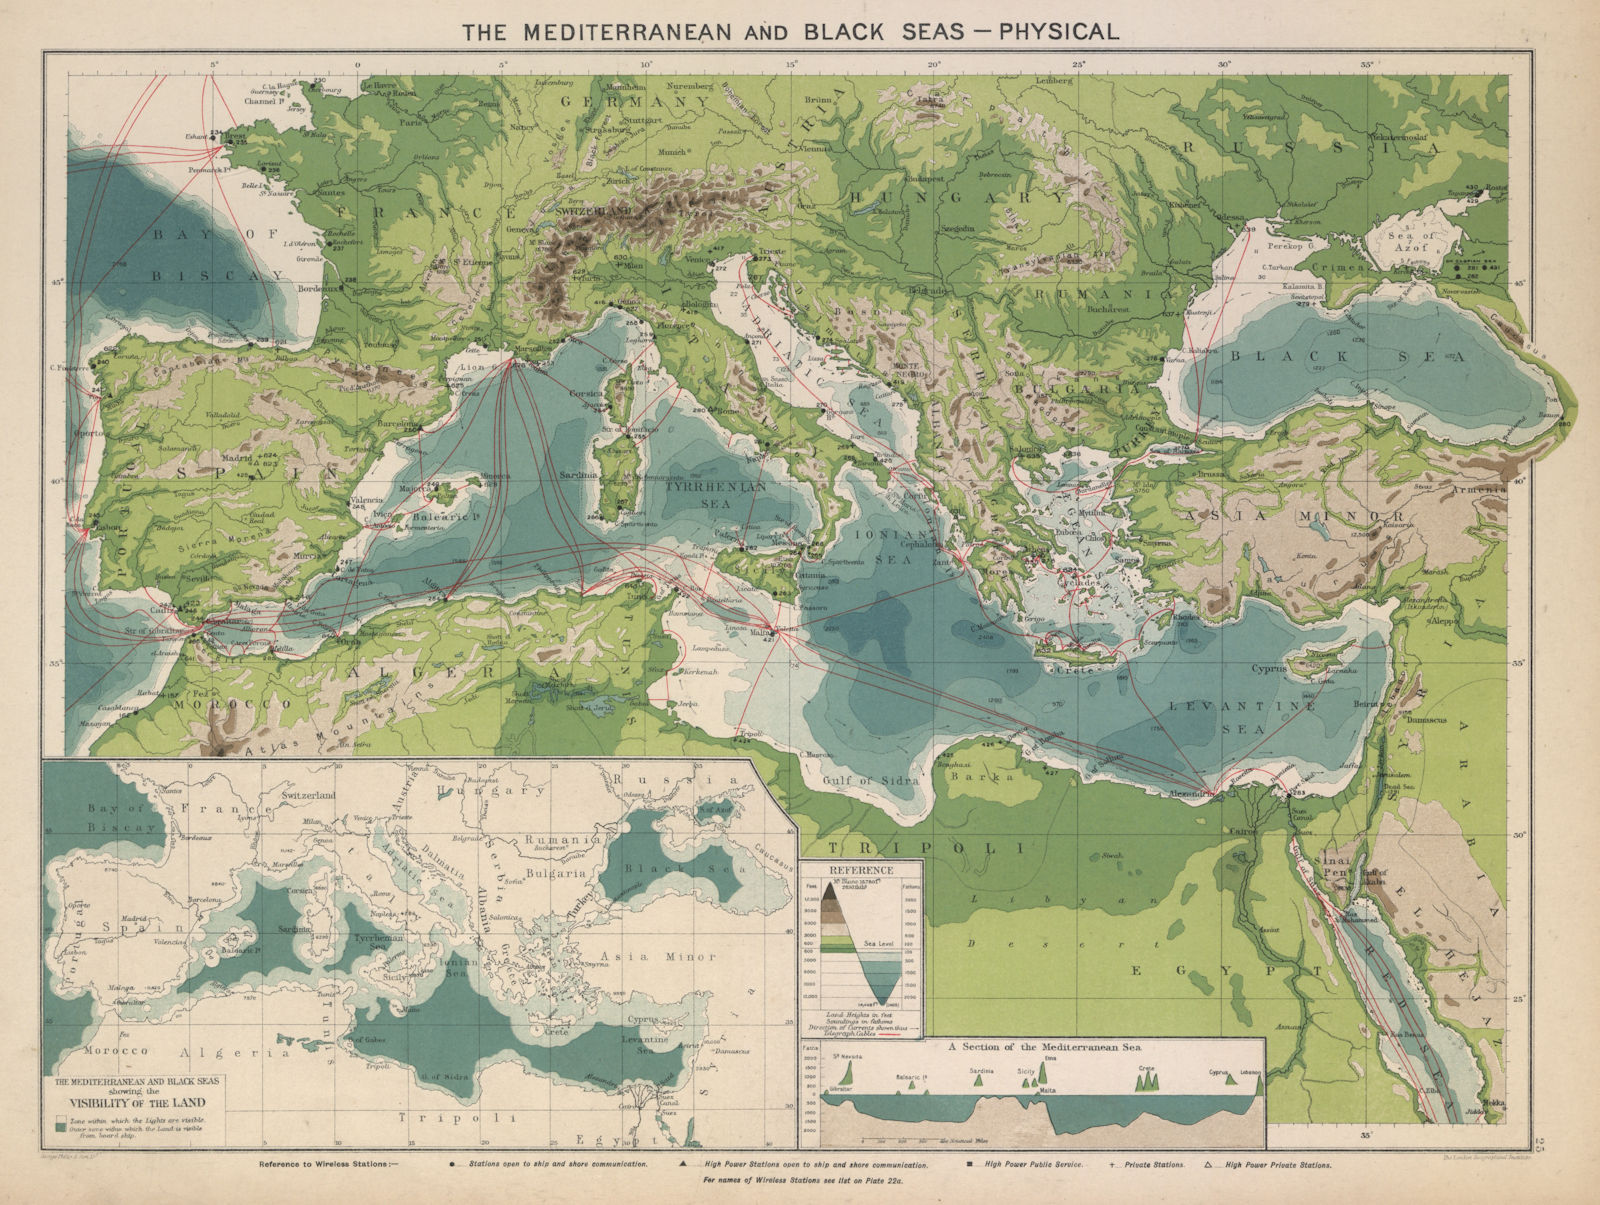 Mediterranean & Black Sea. Cables & Wireless Stations. Land visibility 1916 map